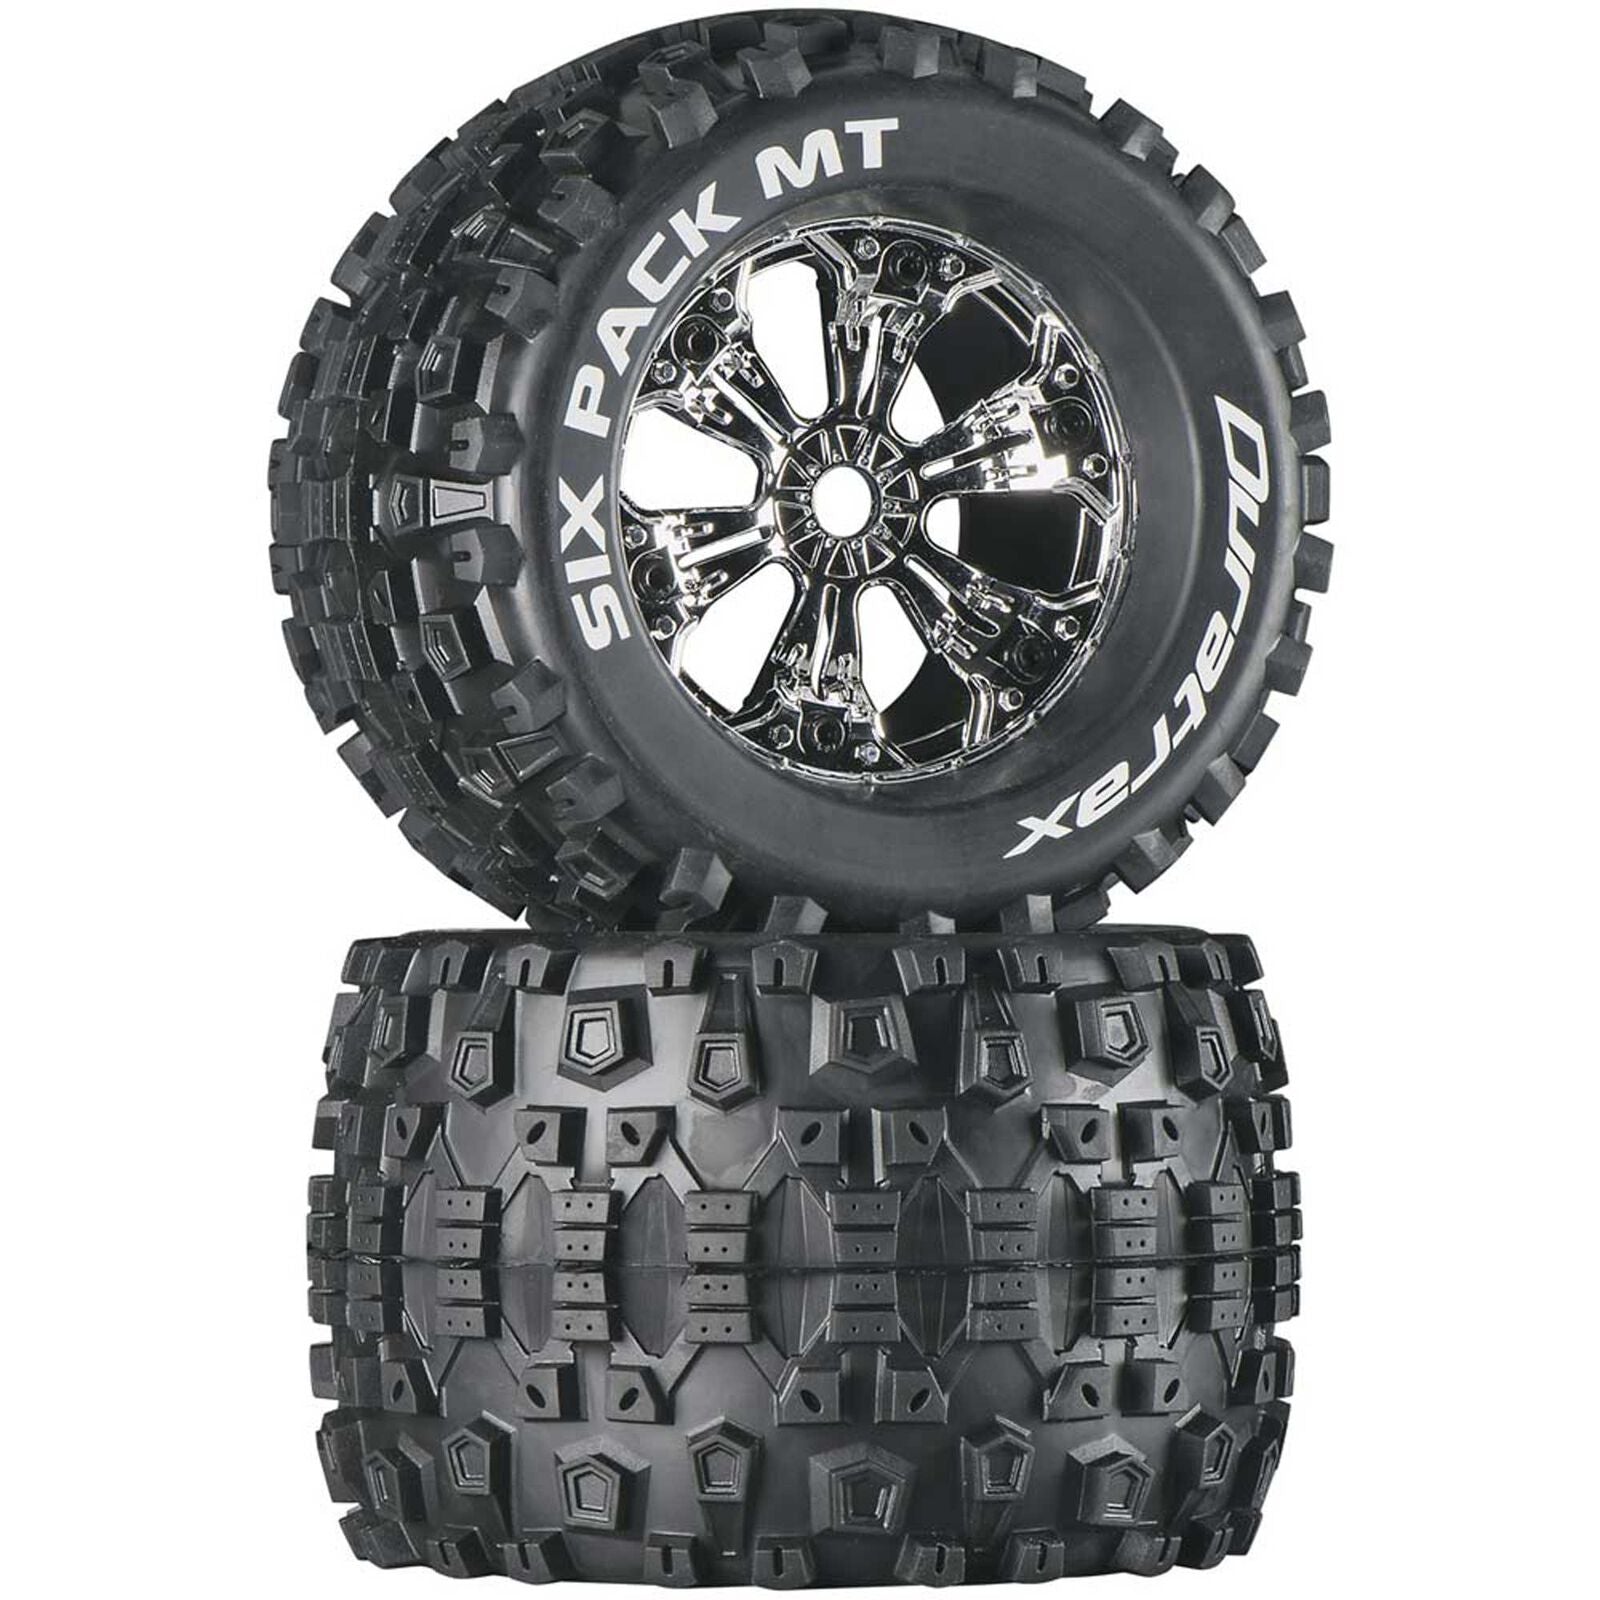 DURATRAX DTXC3583 Six-Pack MT 3.8" Mounted Tires, Chrome (2)